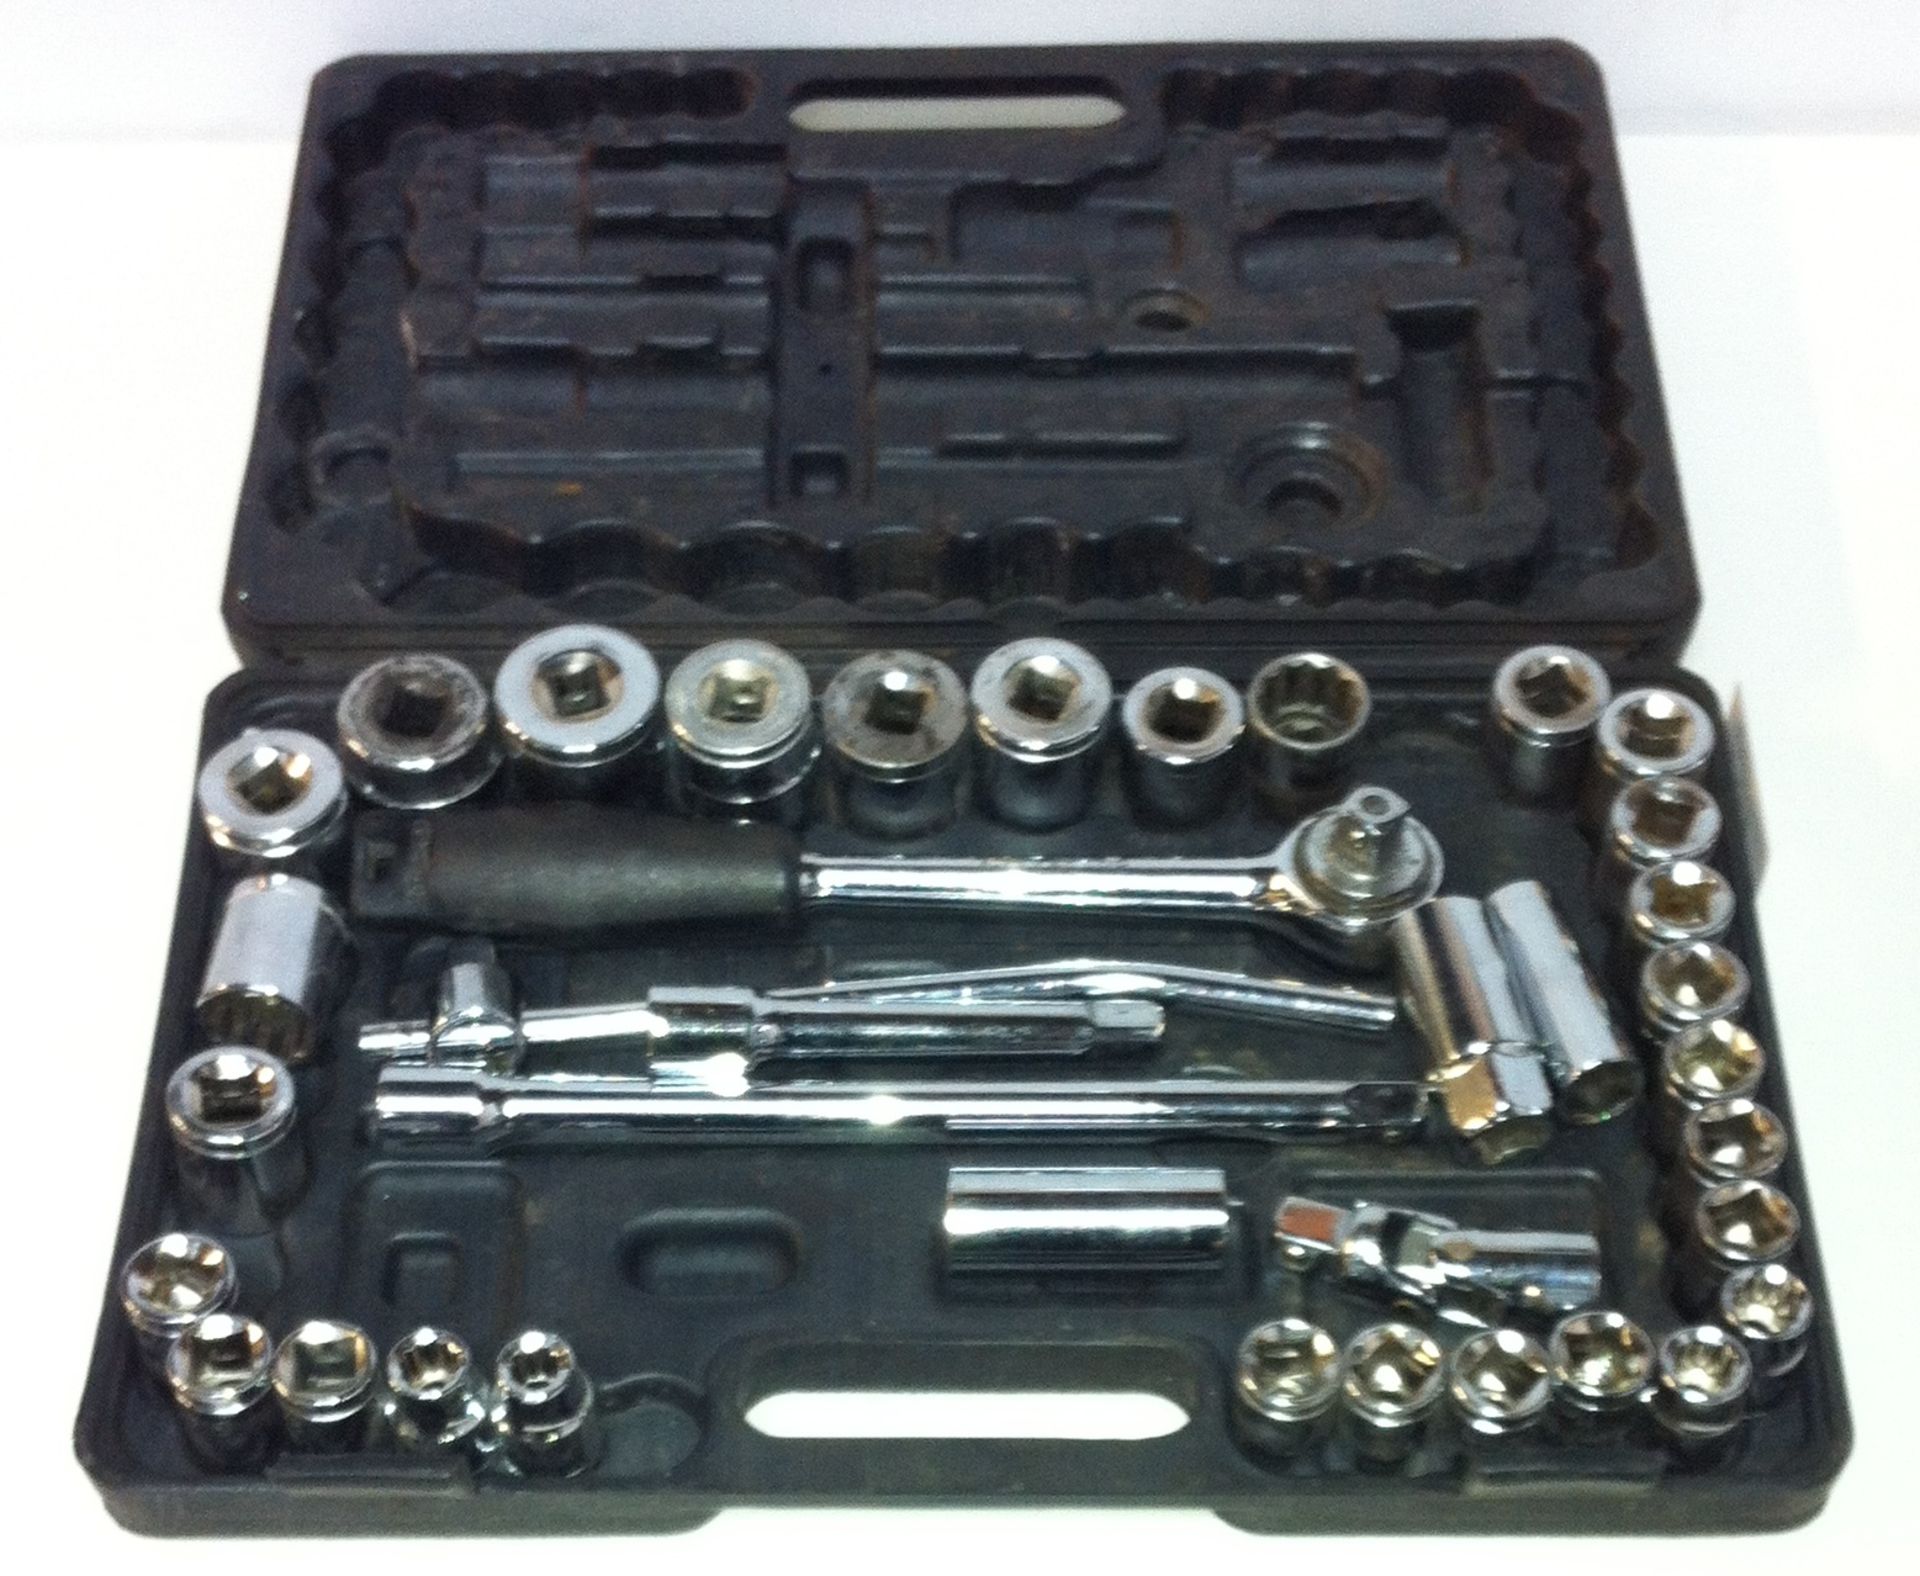 Draper socket wrench kit with case